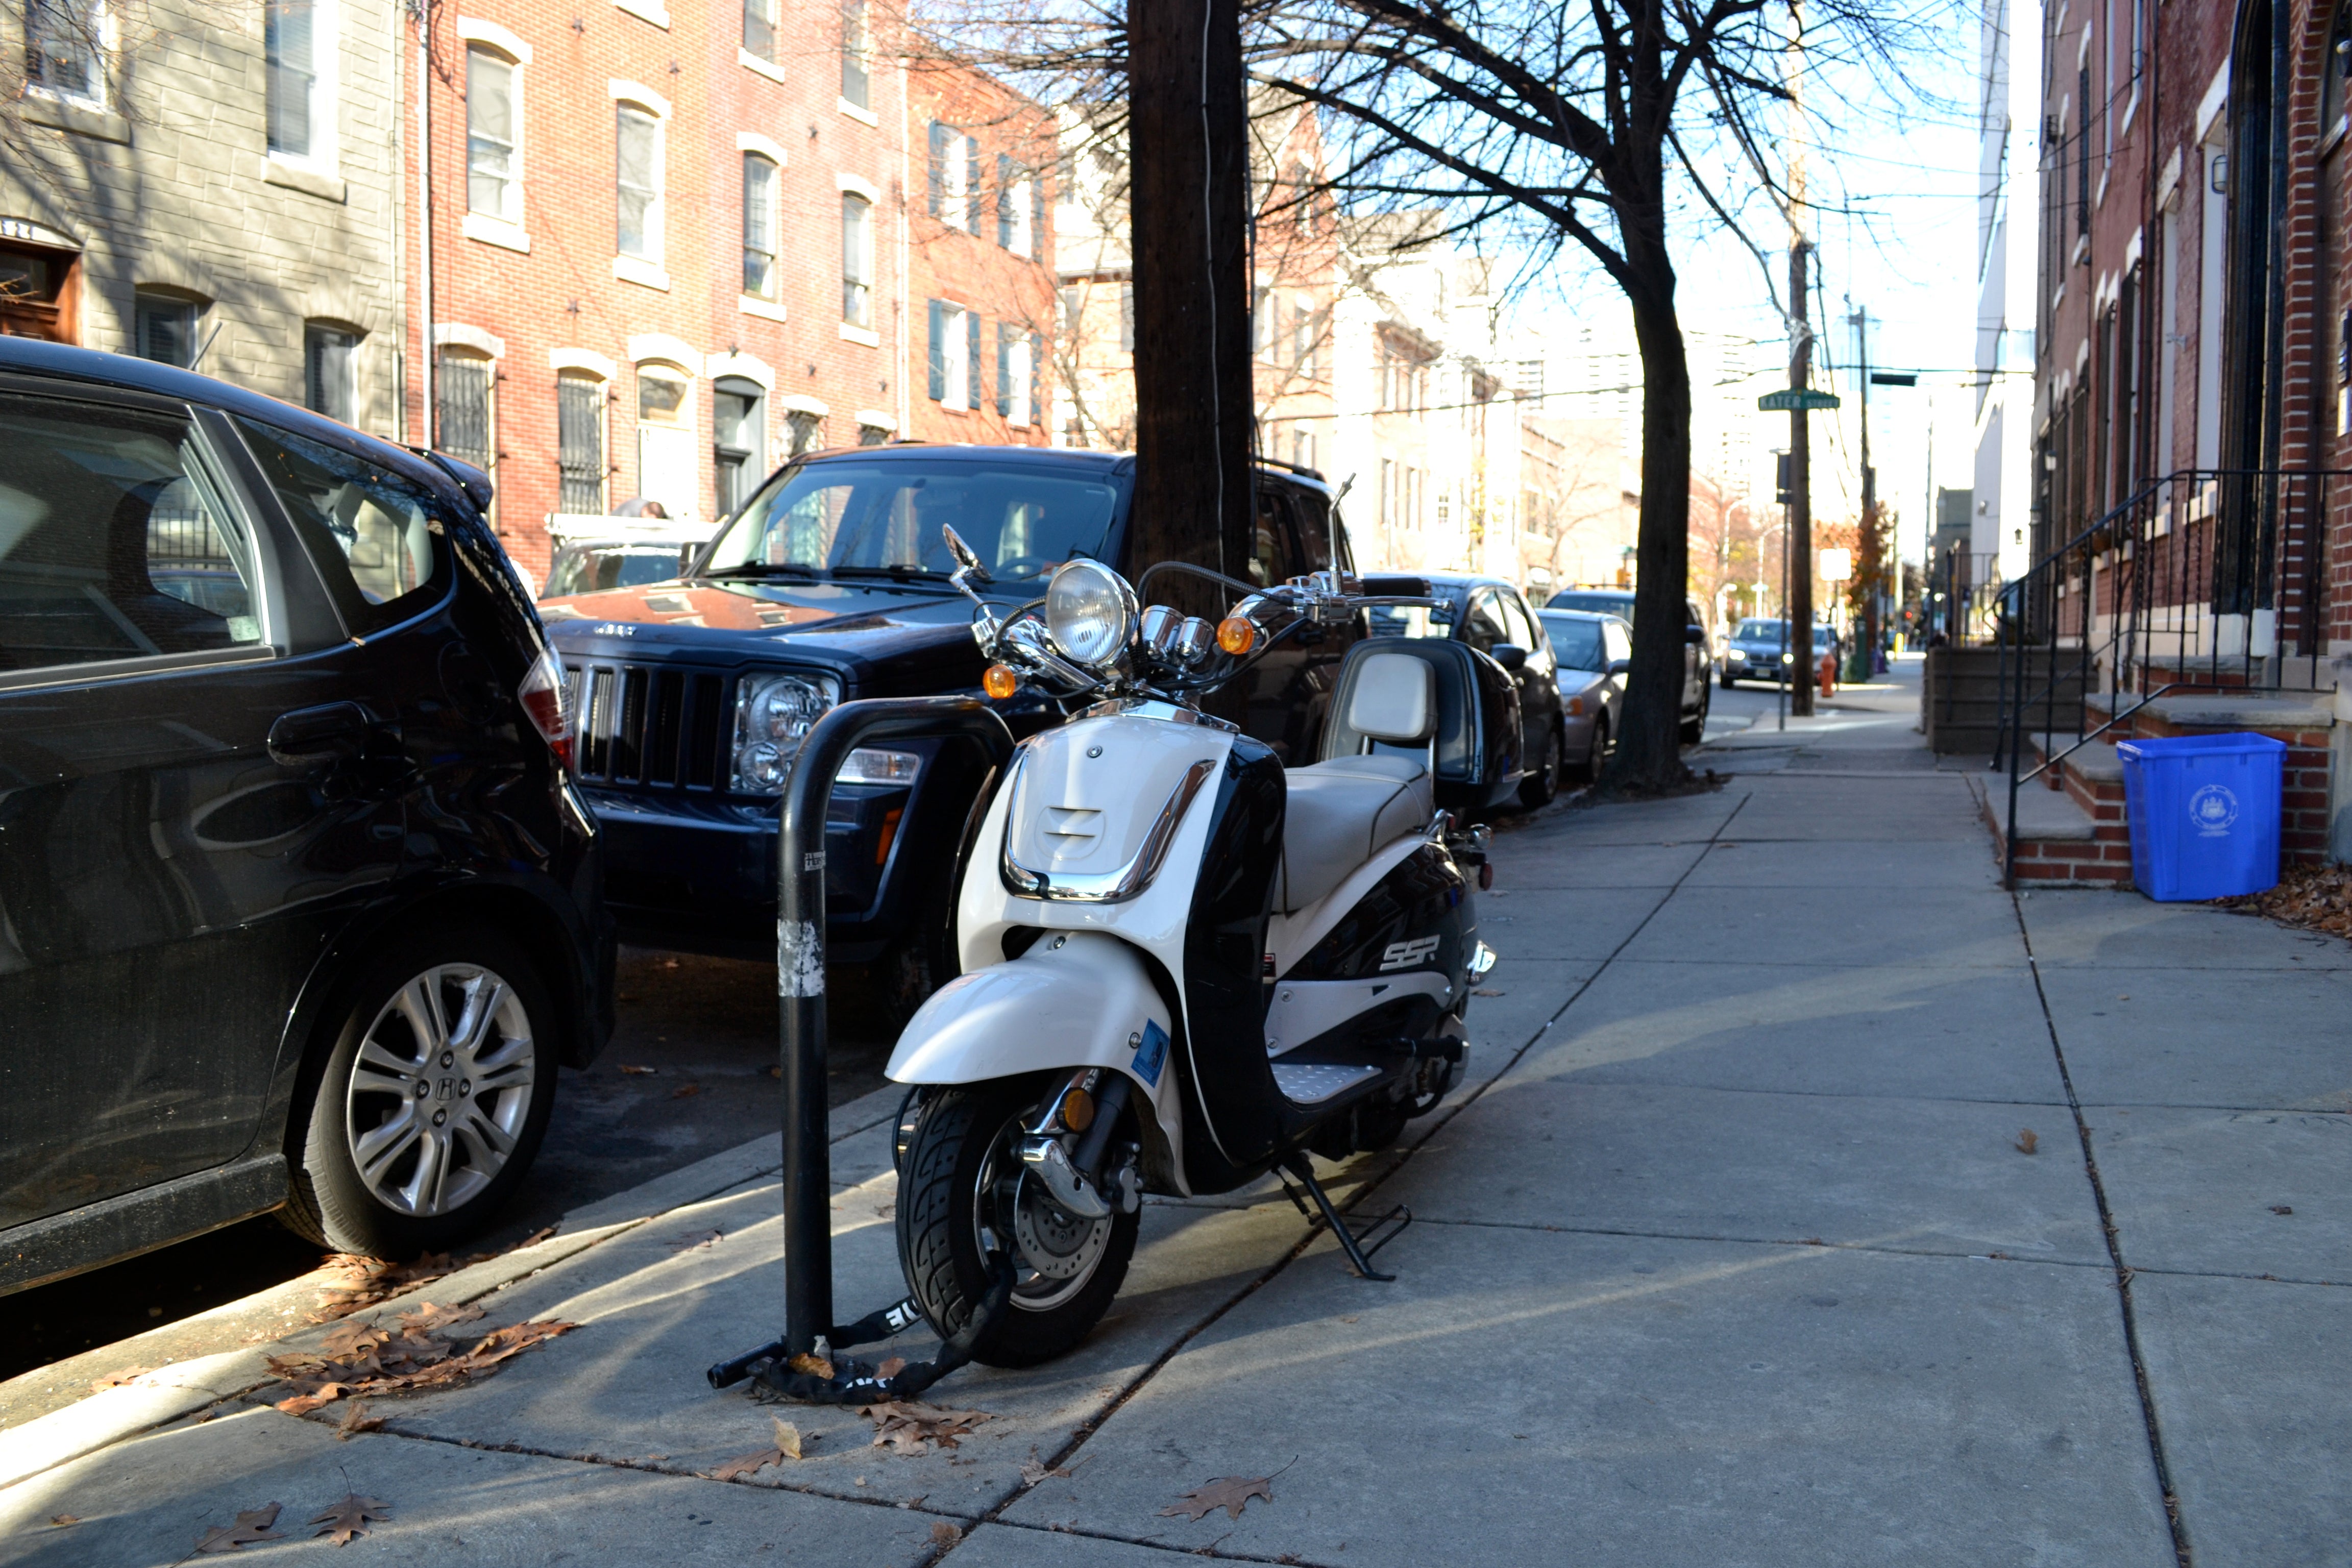 New motorcycle and scooter parking regulations go into effect Jan. 6